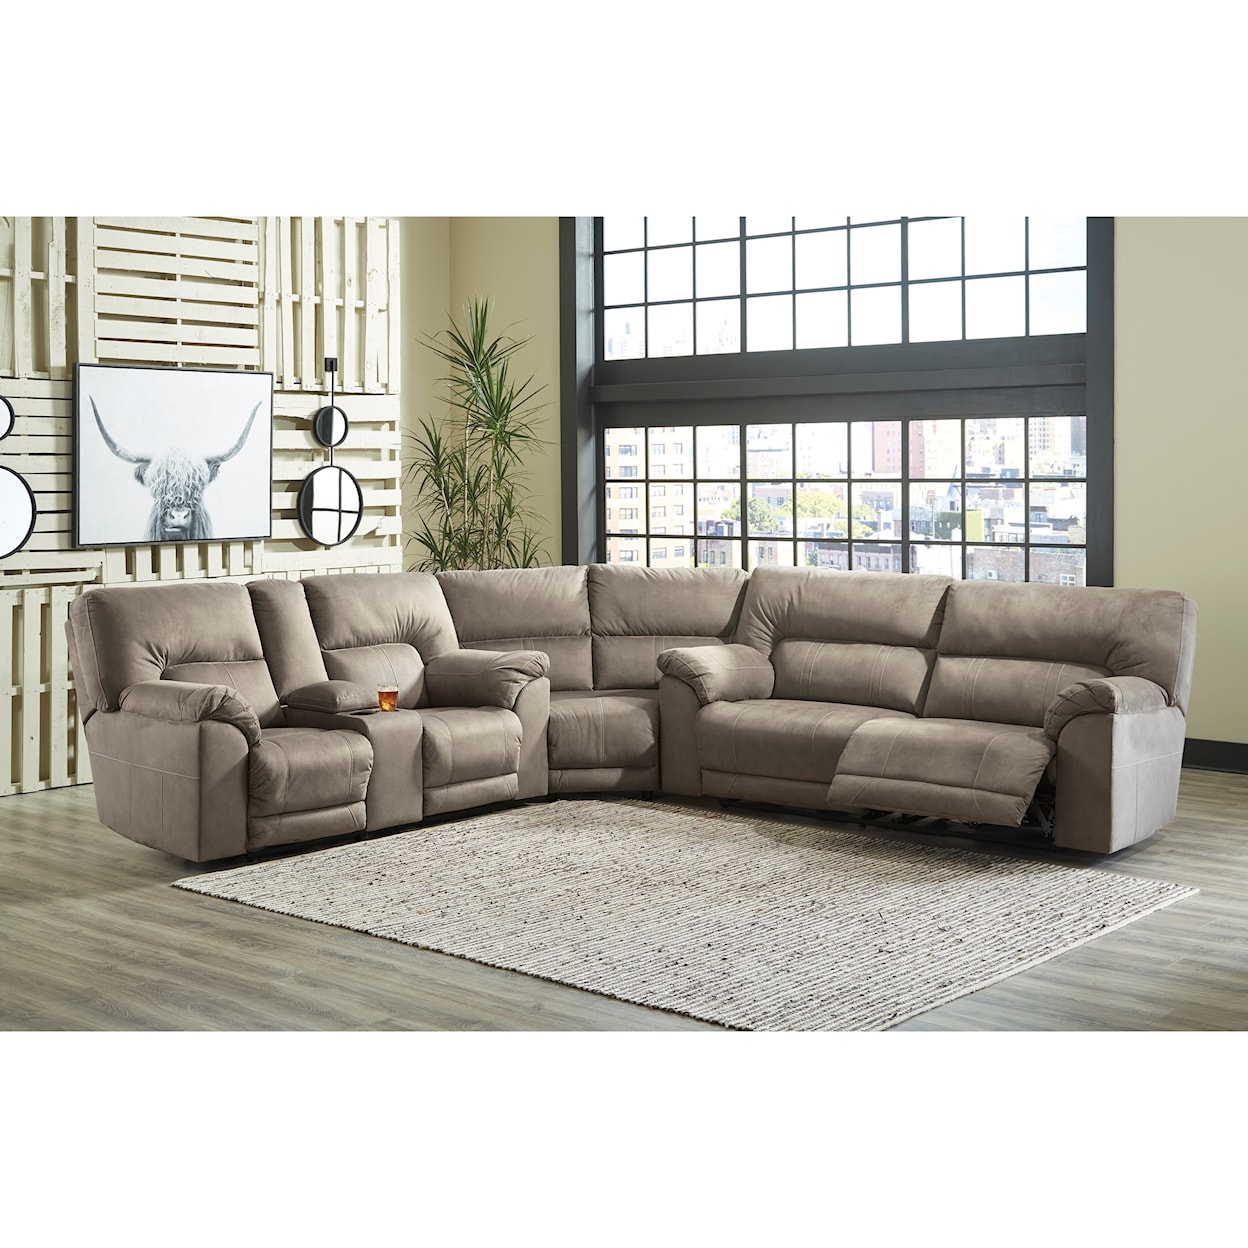 Ashley Furniture Benchcraft Cavalcade Reclining Sectional